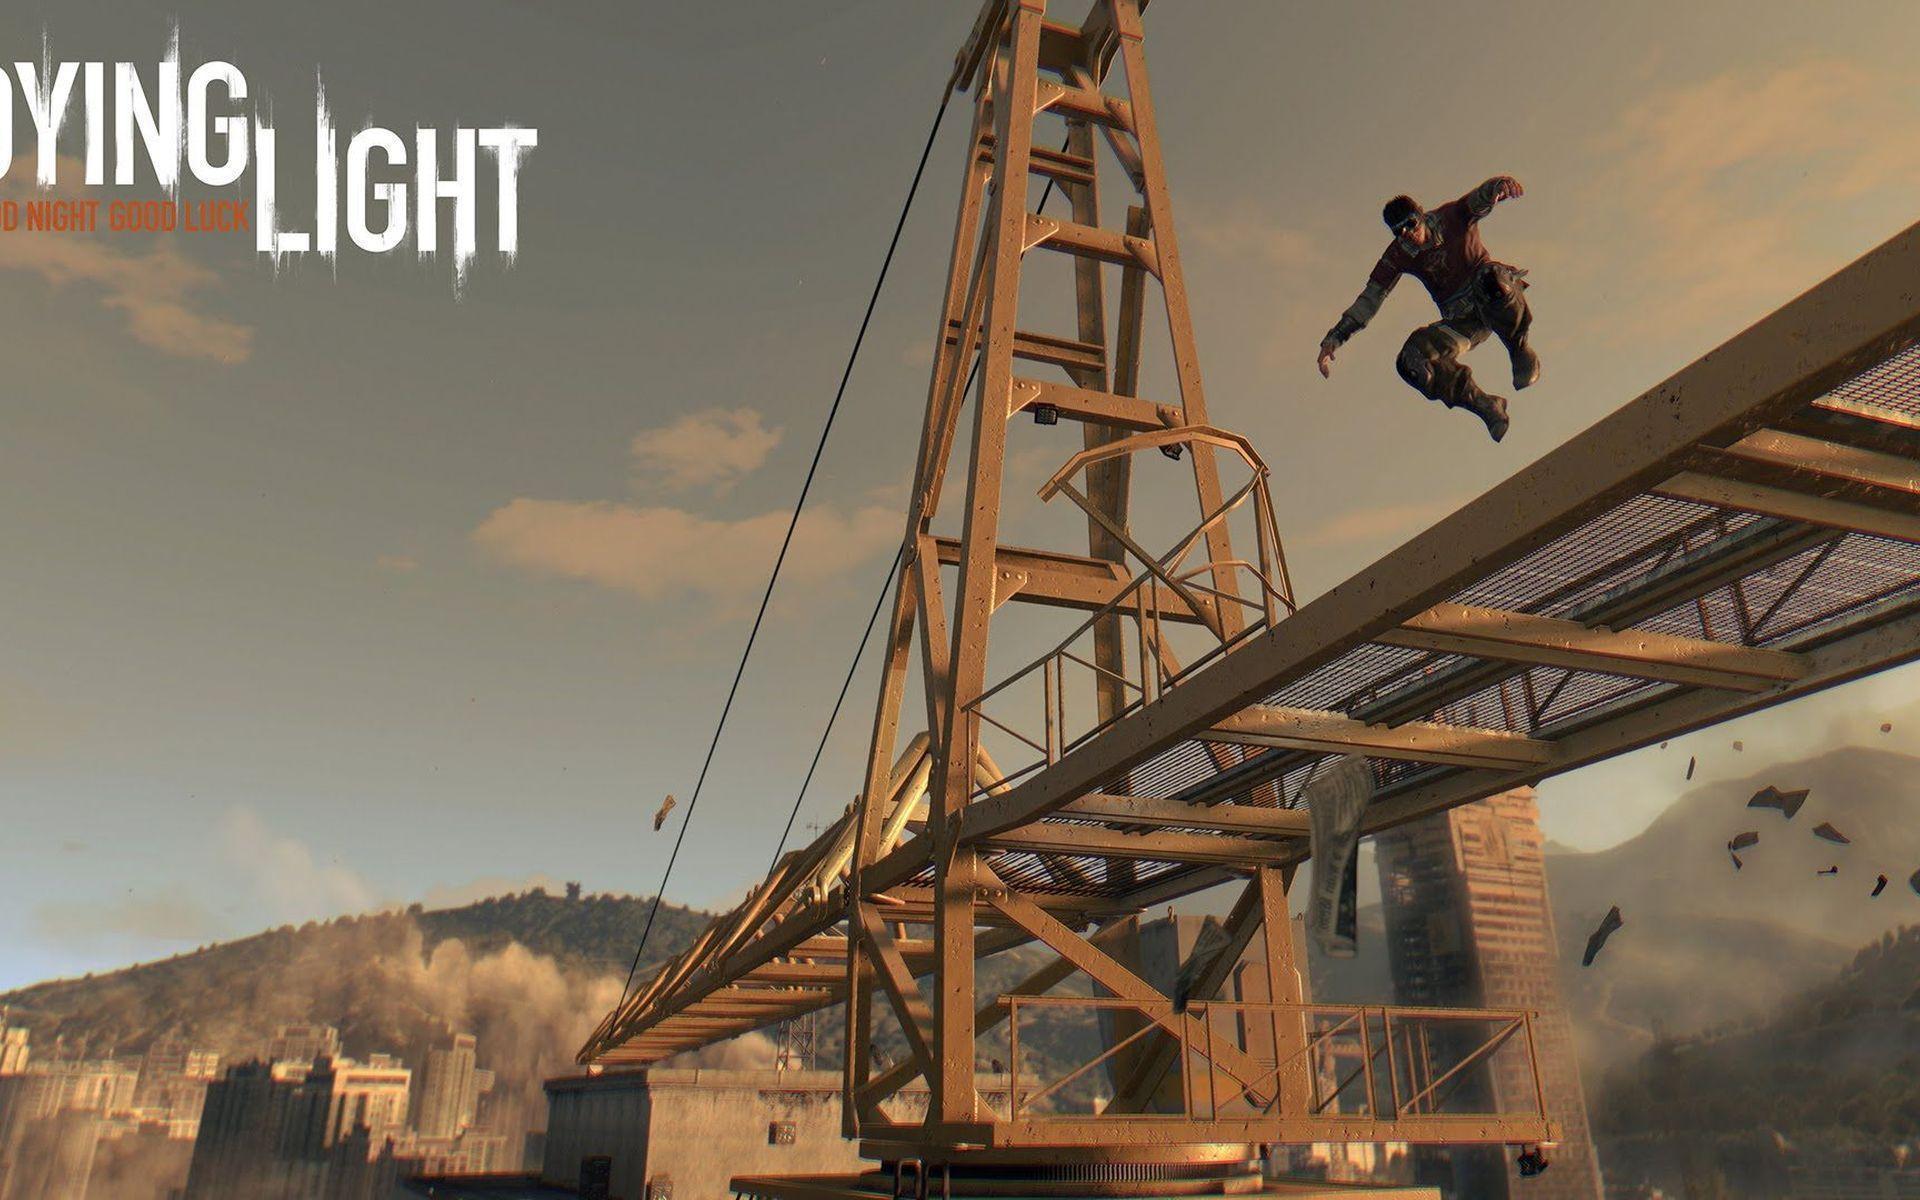 Dying Light Wallpaper and Desktop Background Free Download